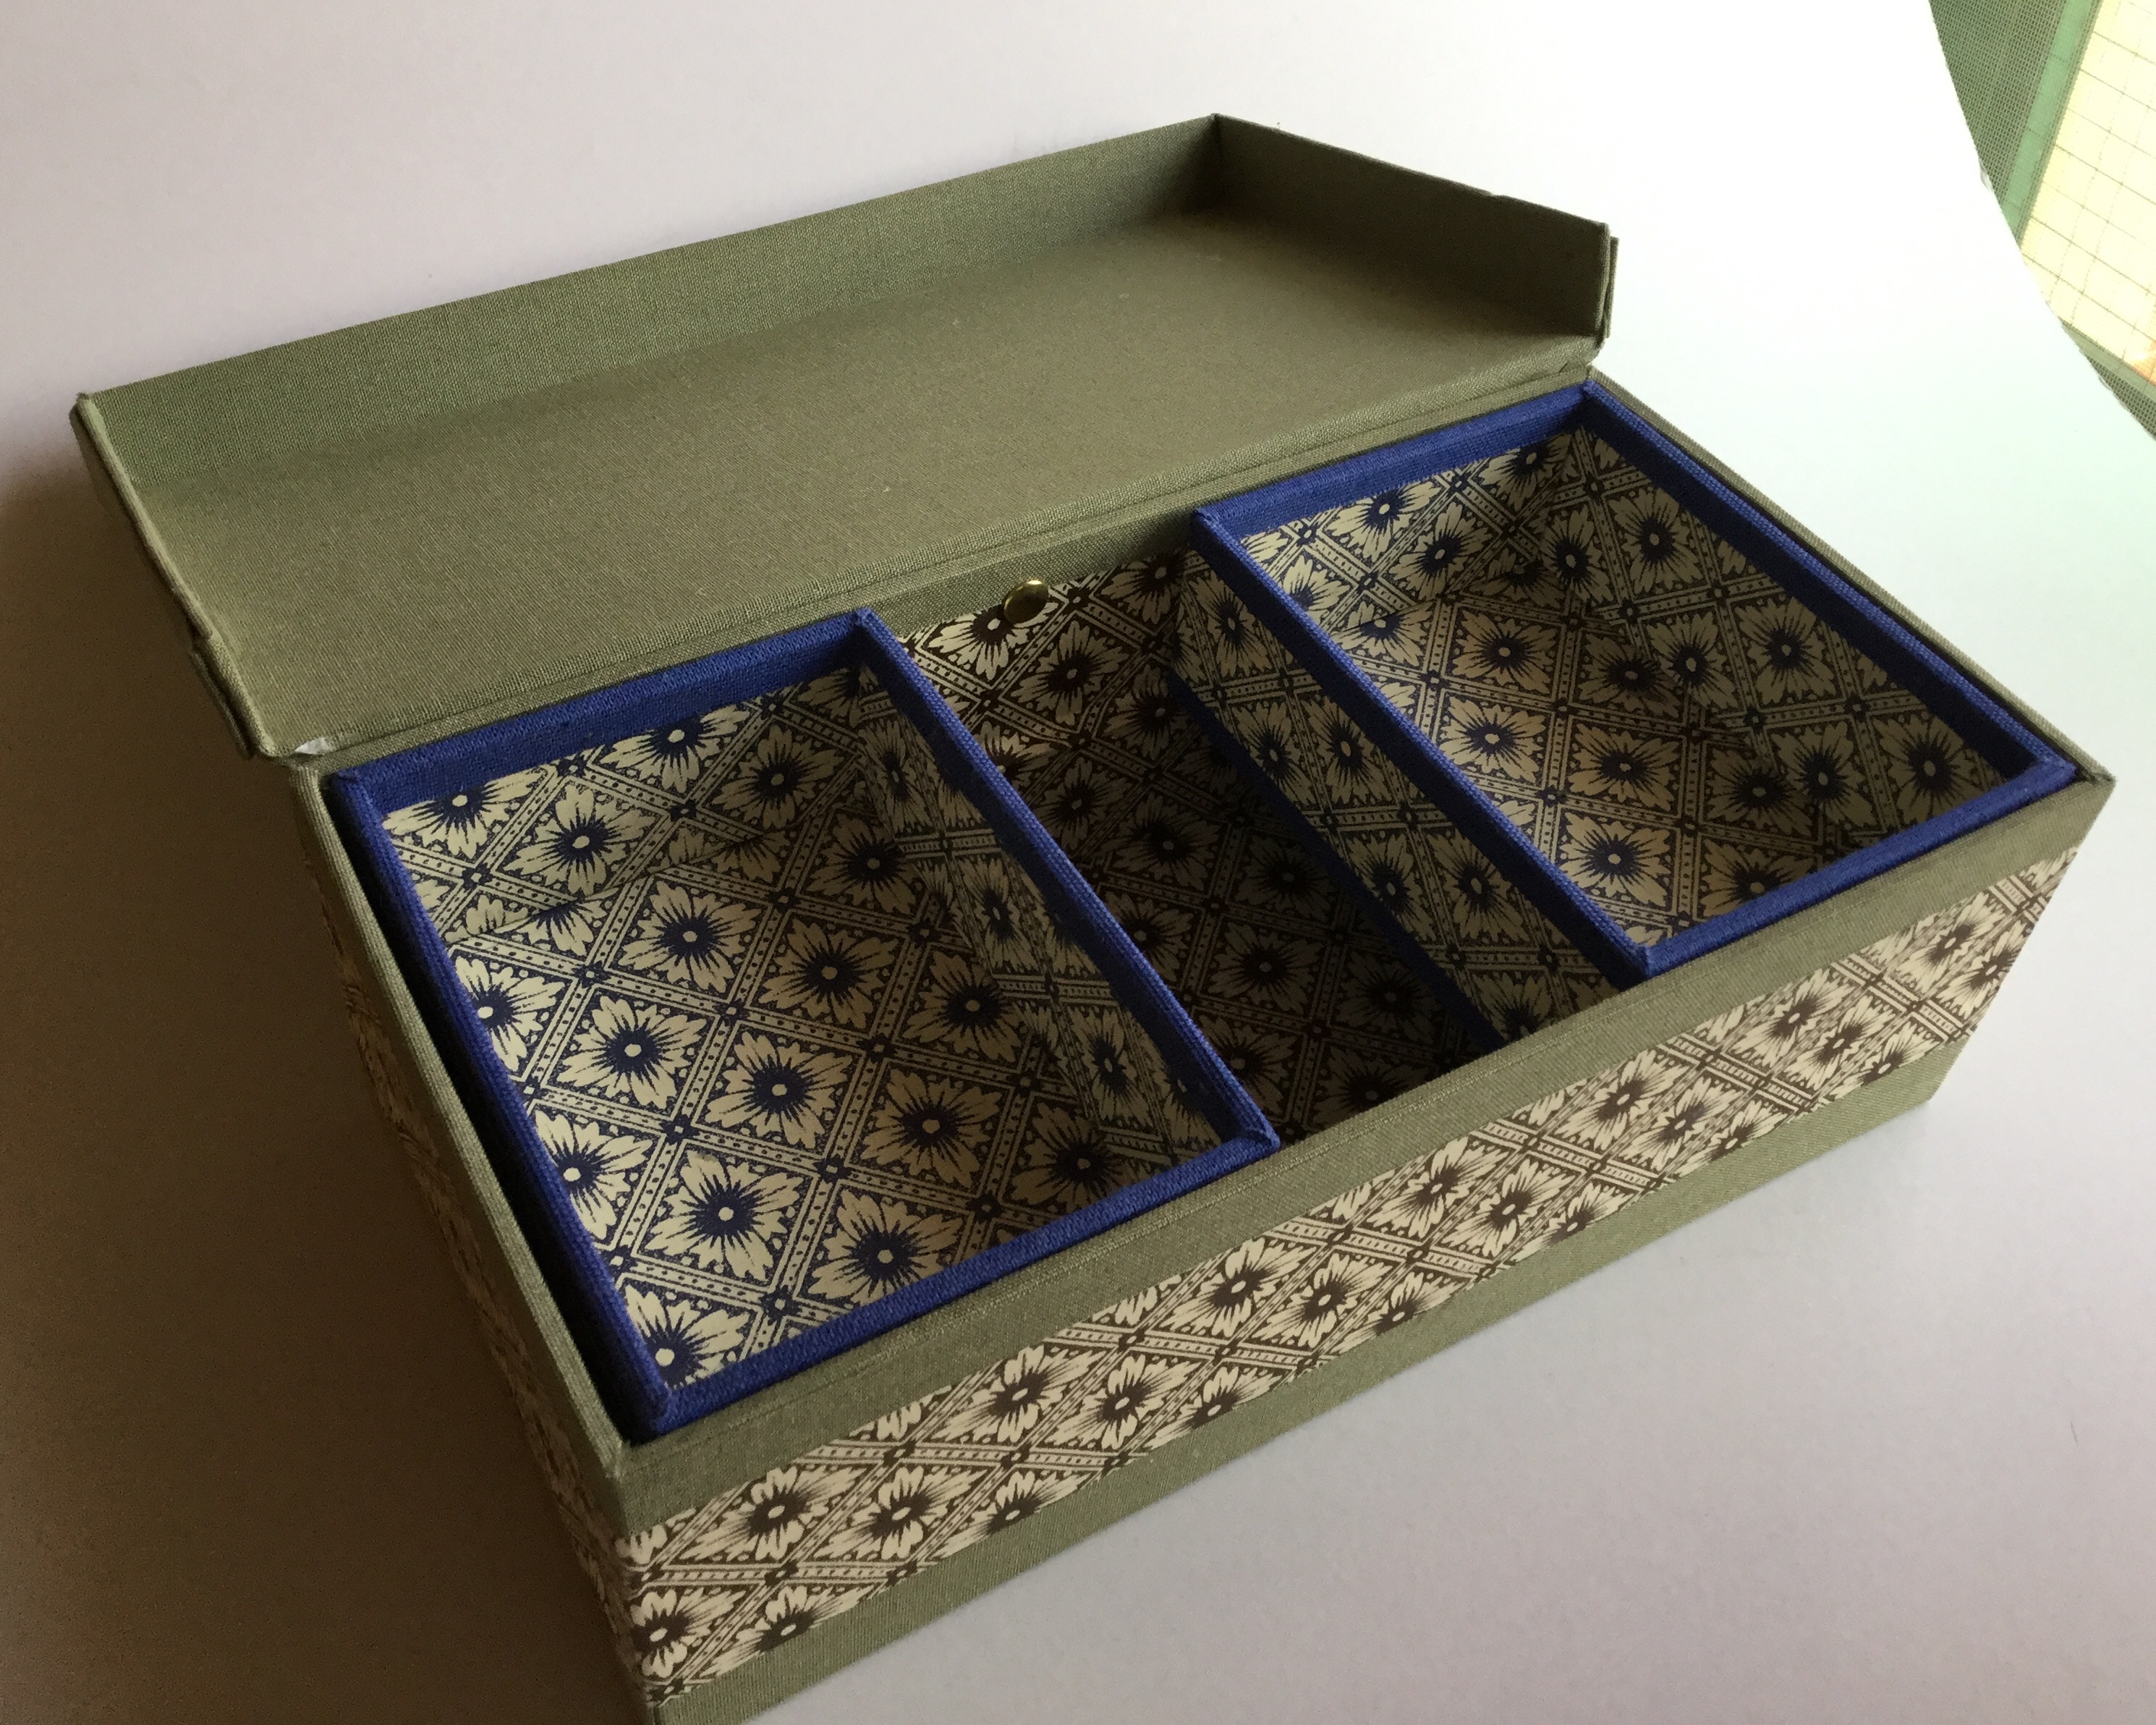 Sewing box open